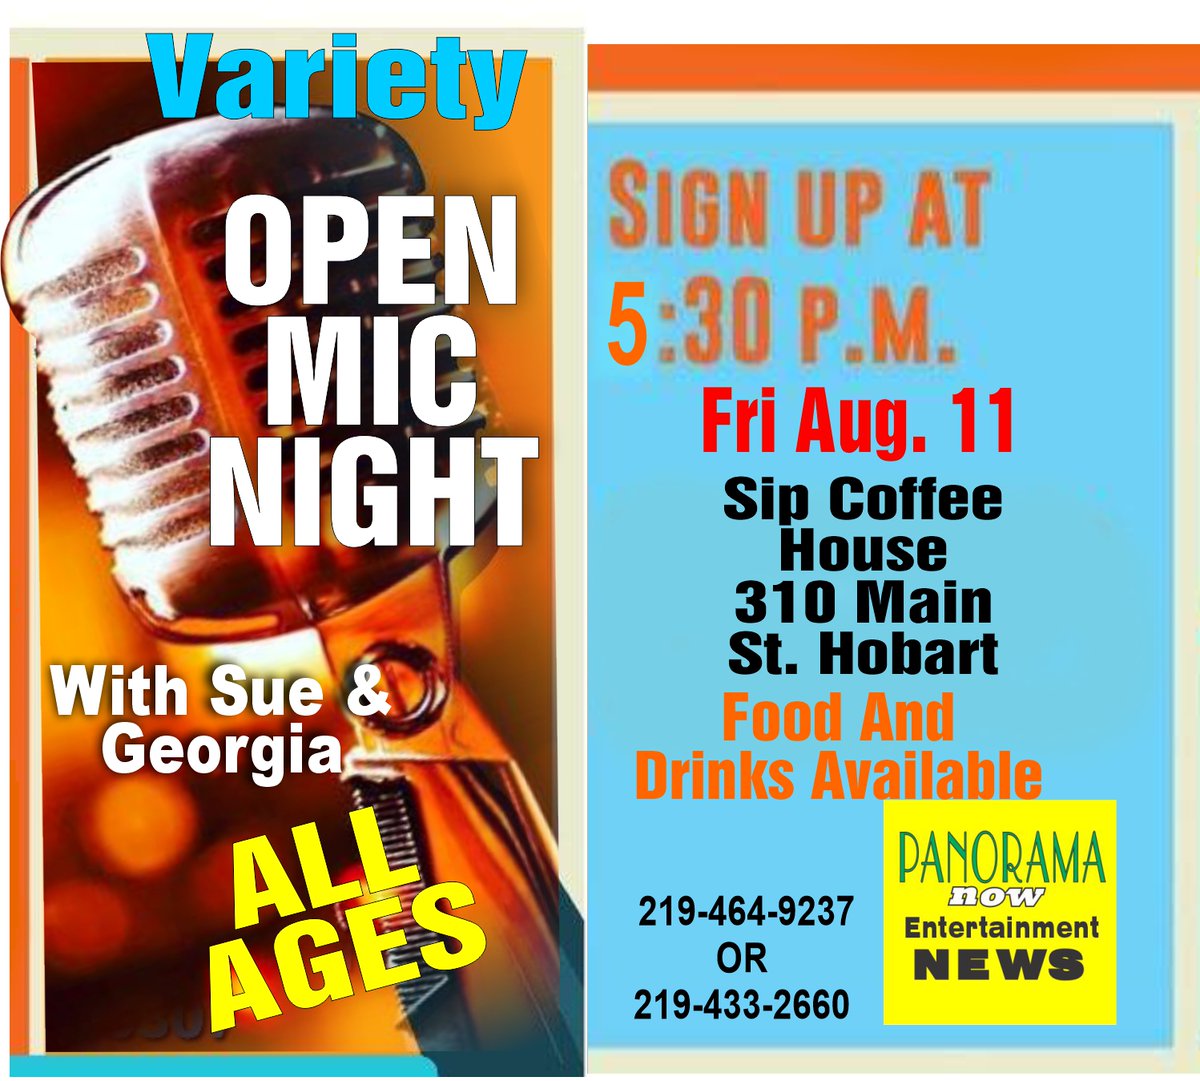 Open Mic - PanoramaNOW Entertainment News panoramanow.com/open-mic/ via @panoramanow #OpenMic #OpenStage #Comedy #Poetry #SpokenWord #SingerSongWriter #Hobart #HobartIndiana #NwiOpenMic #Clowns #StandUpComedy #Comedians #PoetrySlam #Storytelling #HobartIN